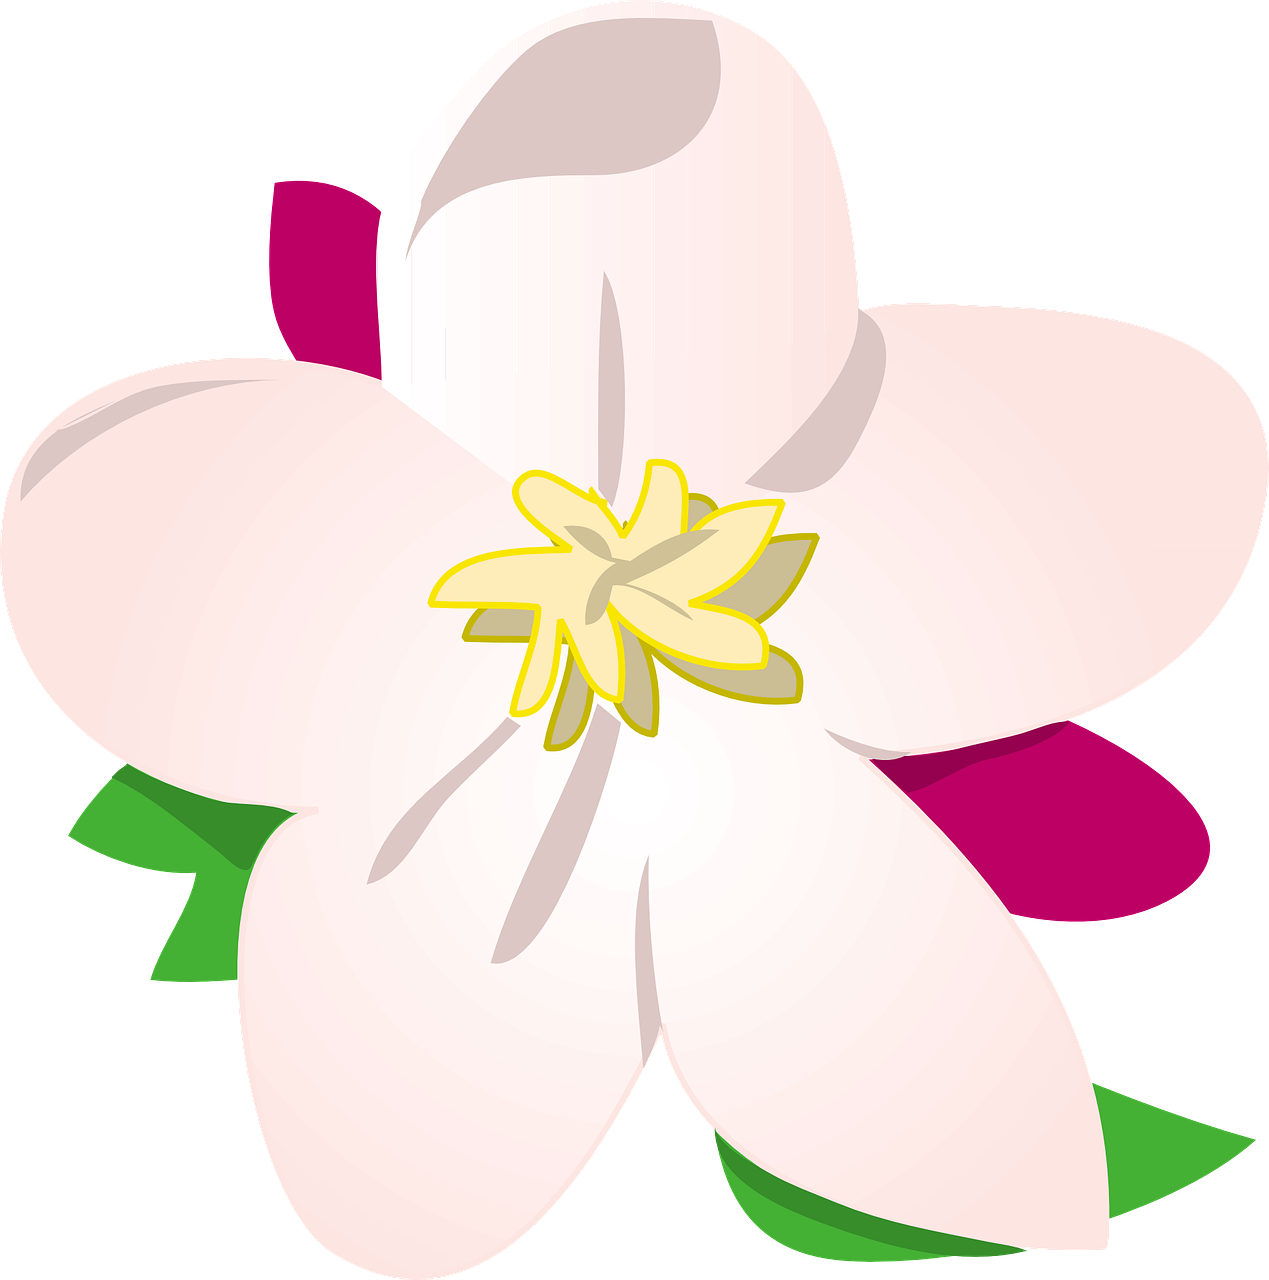 a white flower with green leaves on a white background, an illustration of, inspired by Masamitsu Ōta, white and pink, fully colored, vanilla, lemon